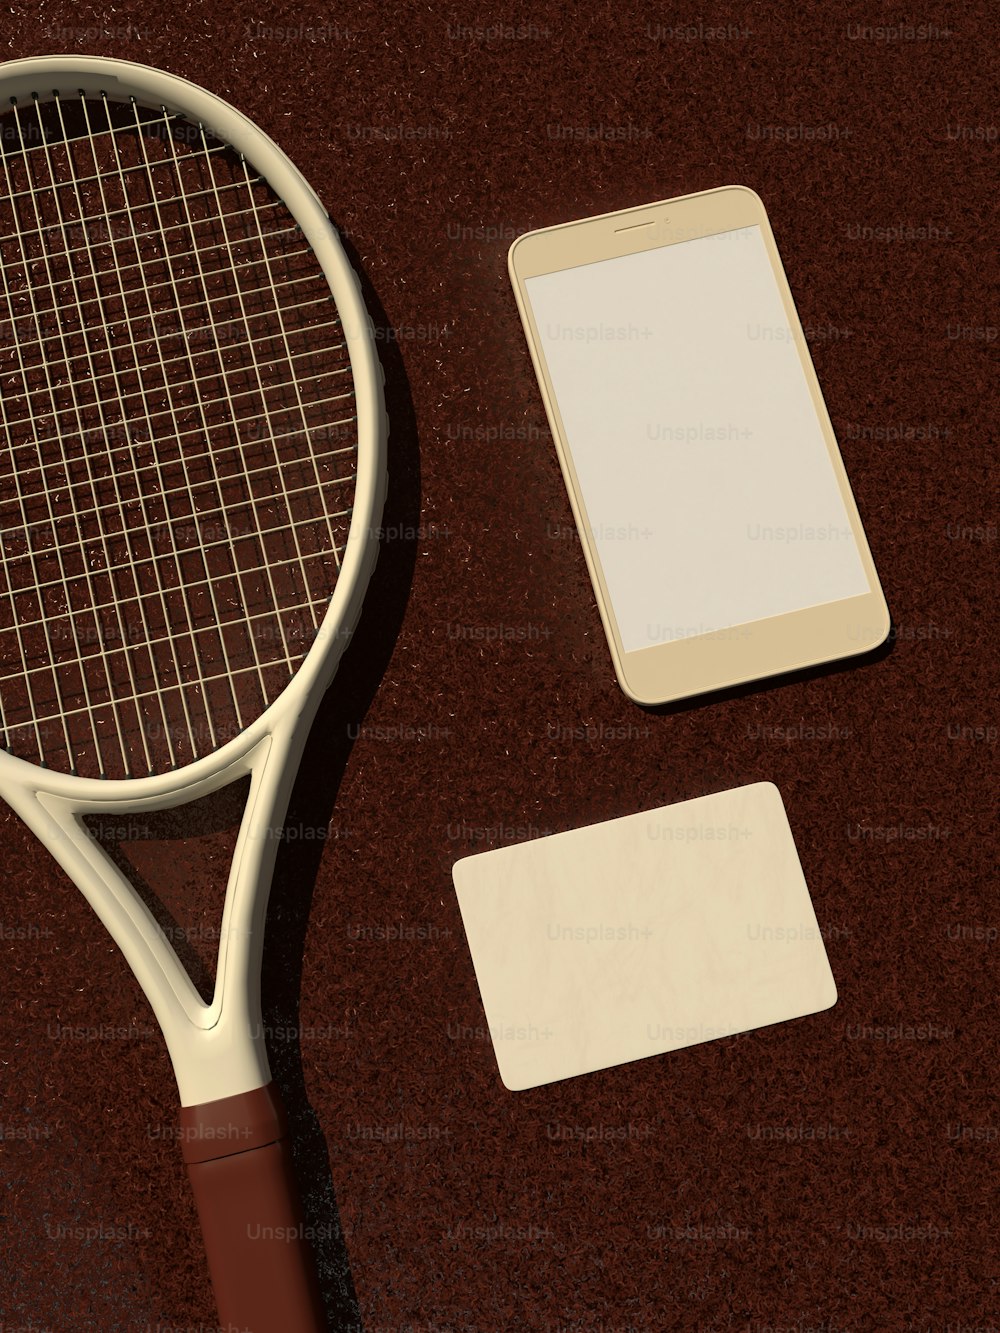 a phone and a tennis racket on a table